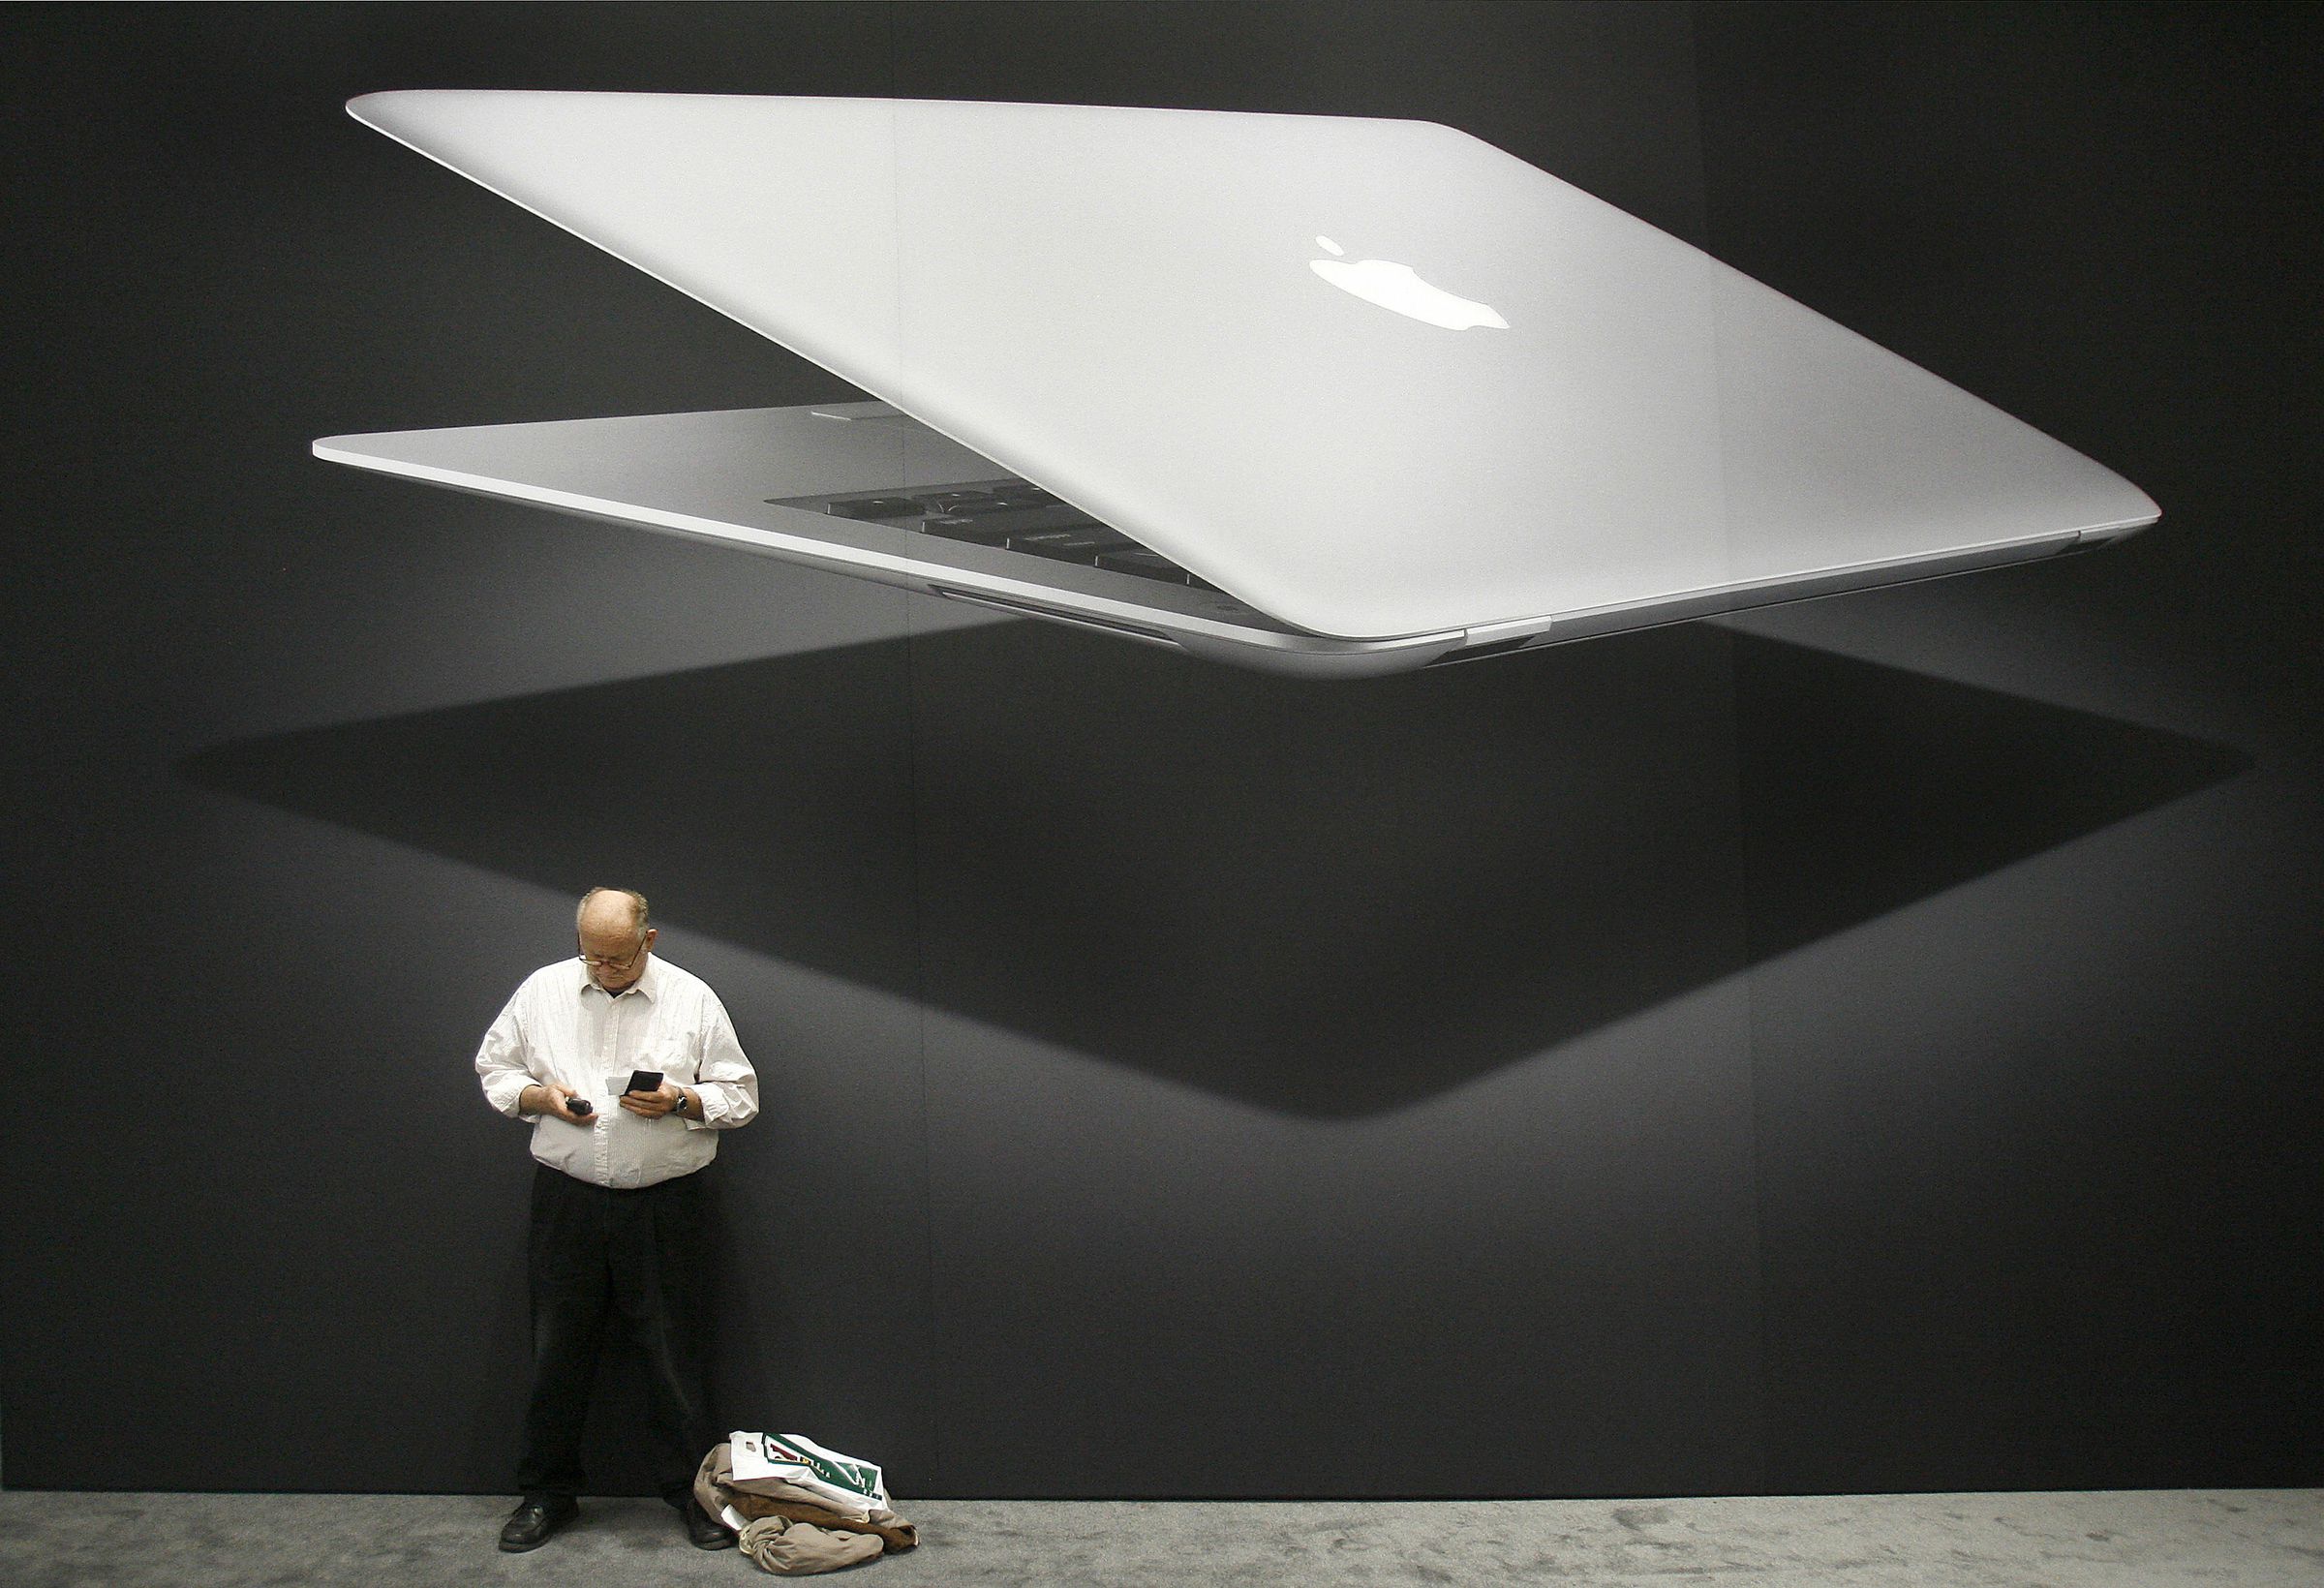 A MacWorld attendee stands next to a gia